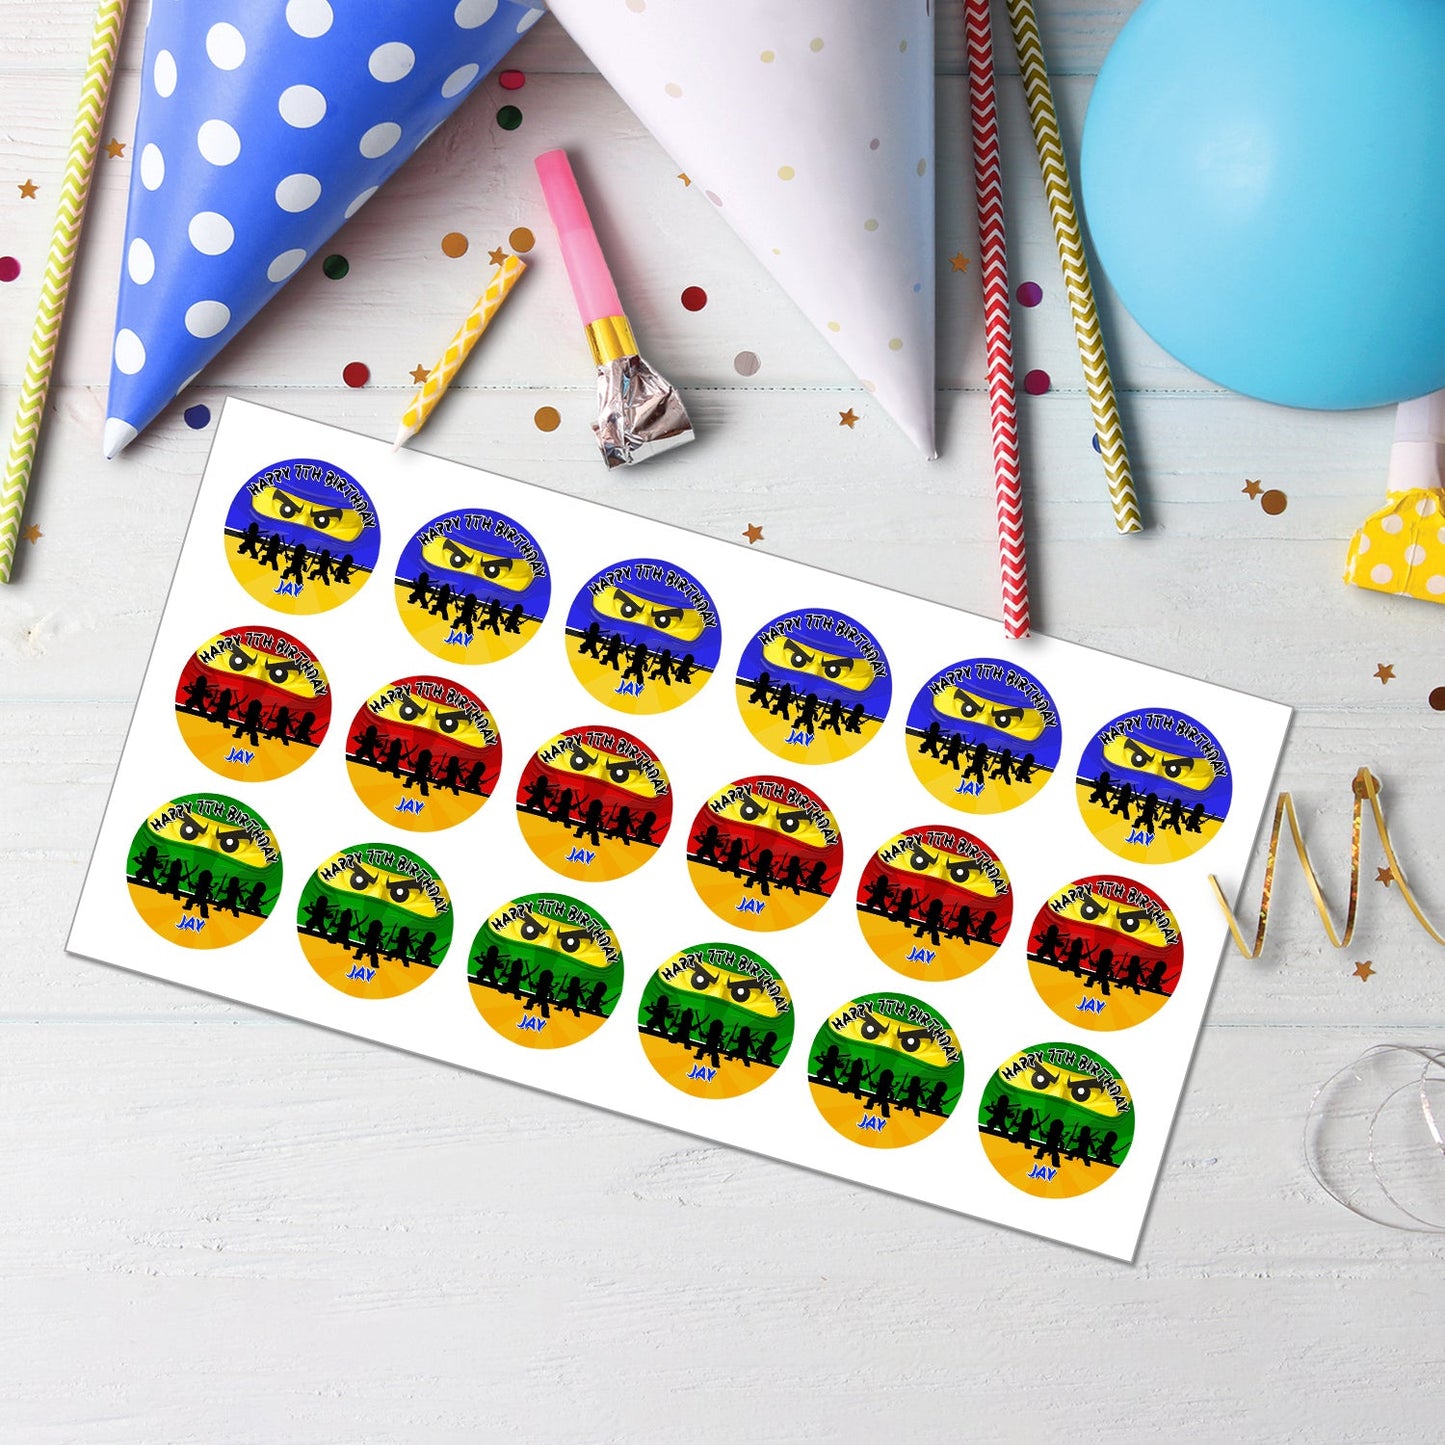 Make Your Cupcakes Stand Out with Our Ninjago Personalized Cupcakes Toppers - Ideal for Parties